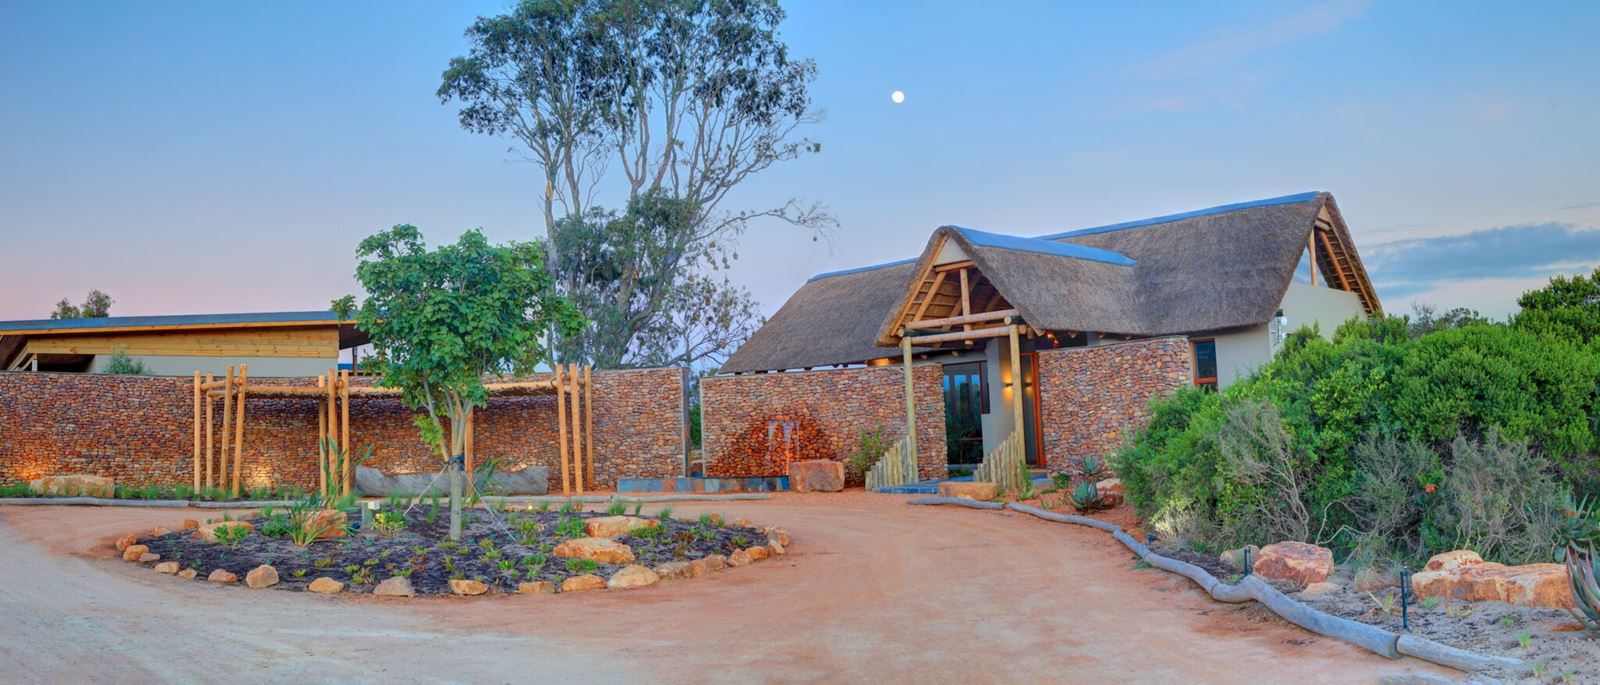 Garden Route Game Lodge Adds New Luxury Rooms Southern East African Tourism Update